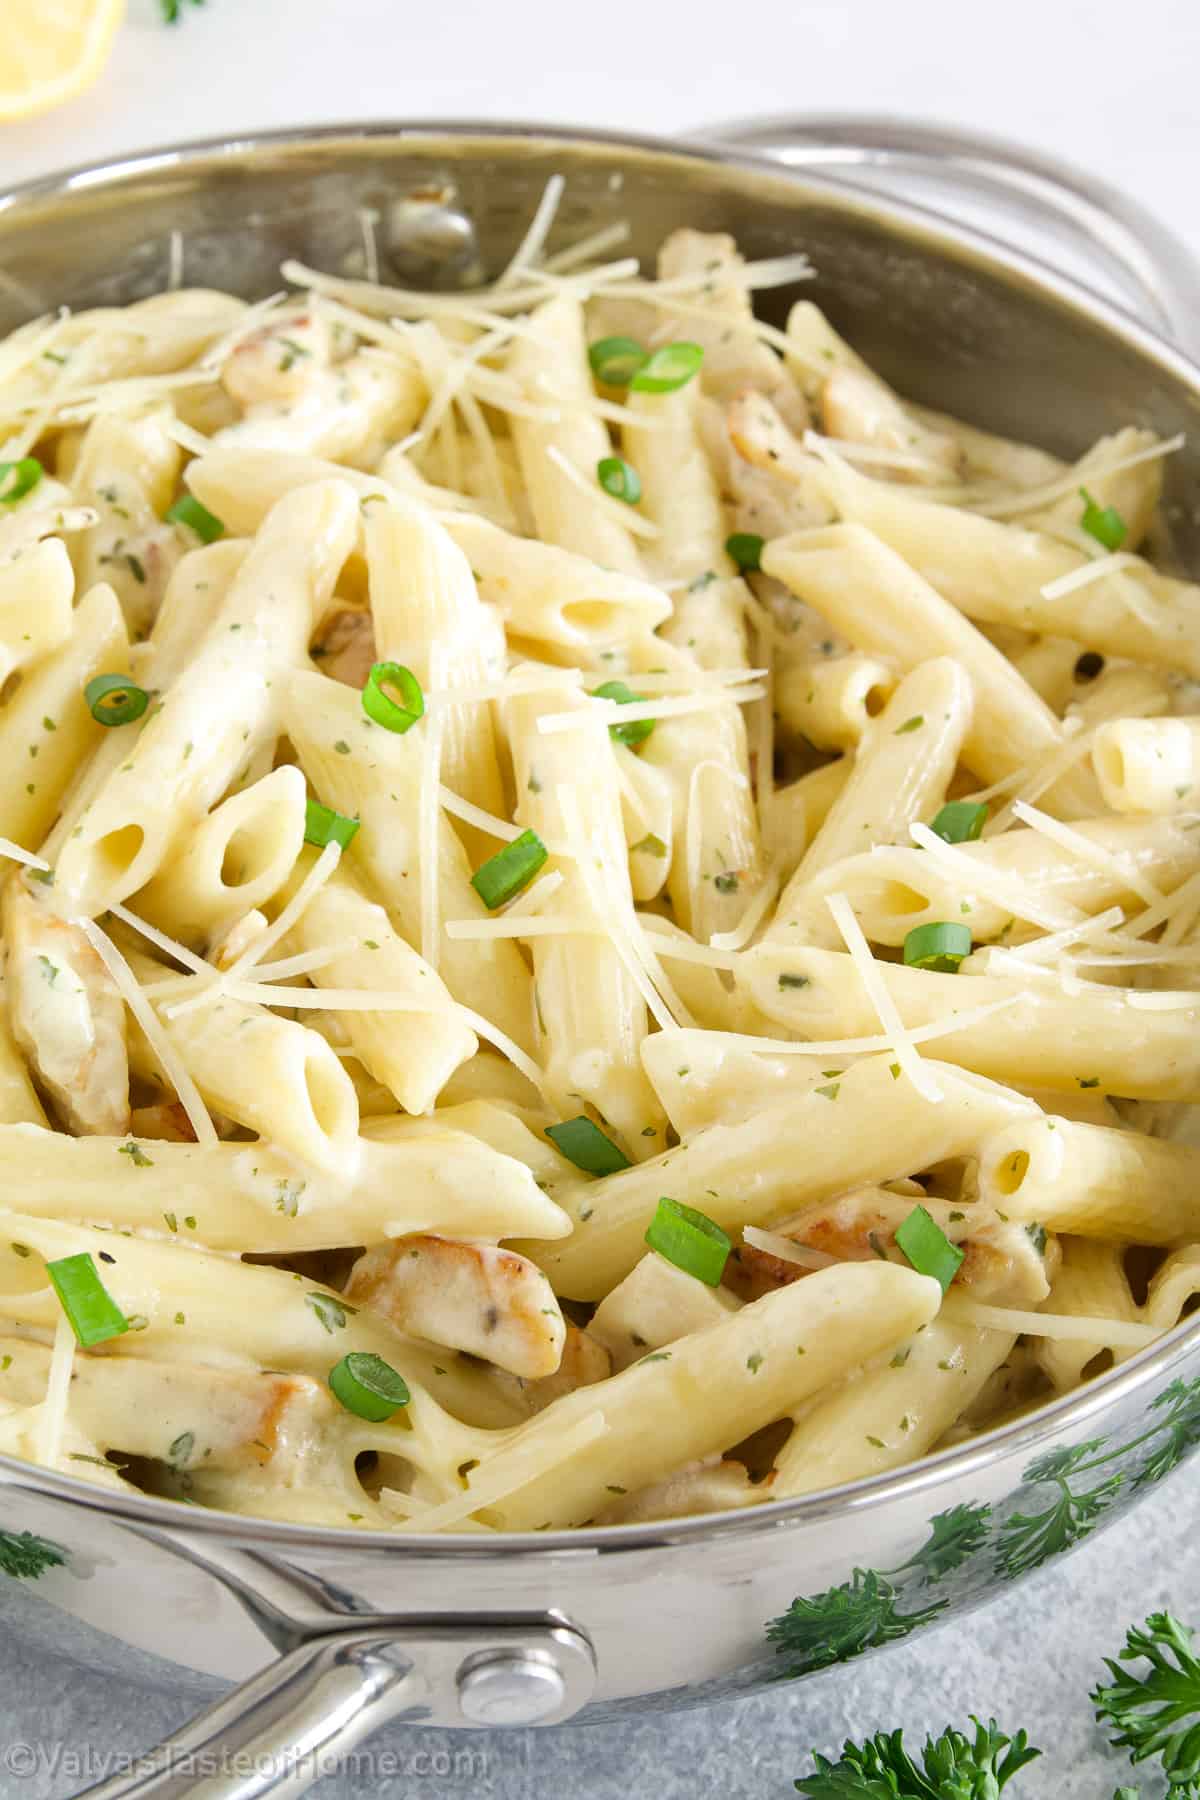 This Garlic Chicken Pasta features a creamy garlic sauce with parmesan cheese and chicken strips that are tossed together with pasta for the most perfect combo!